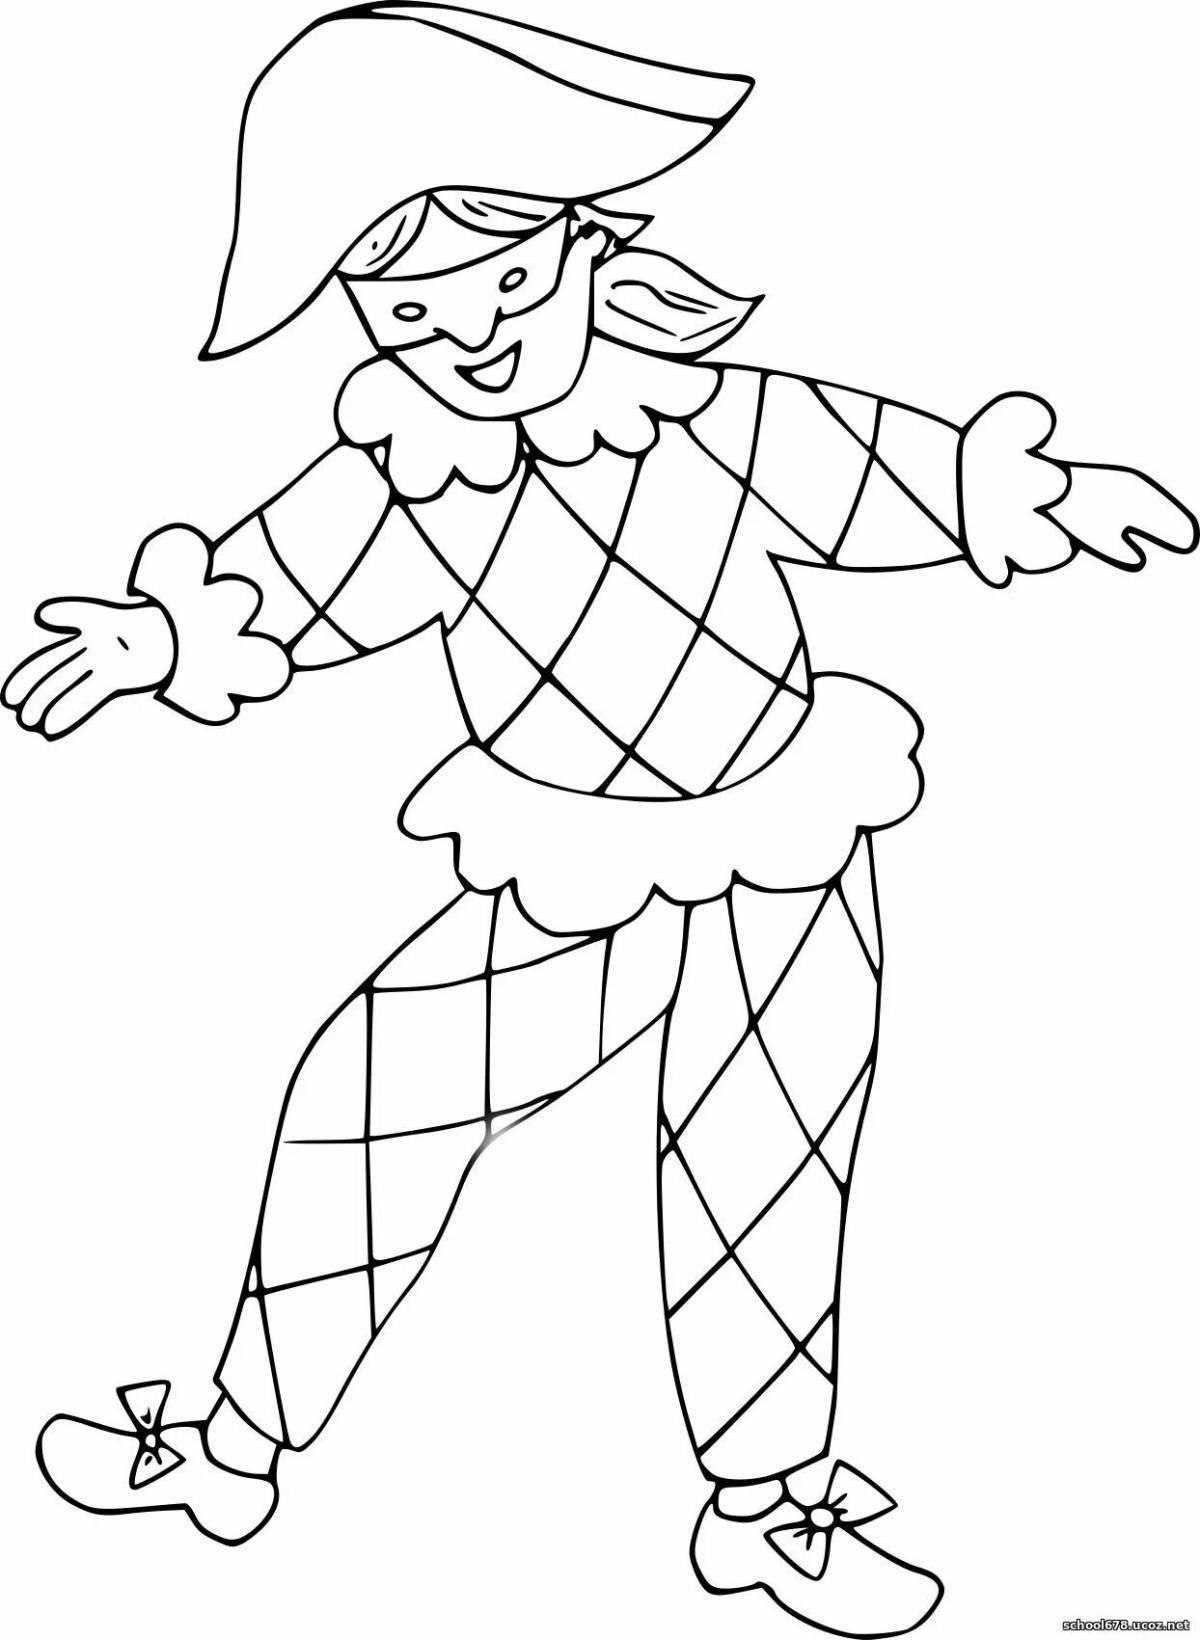 Fine theater costumes coloring book